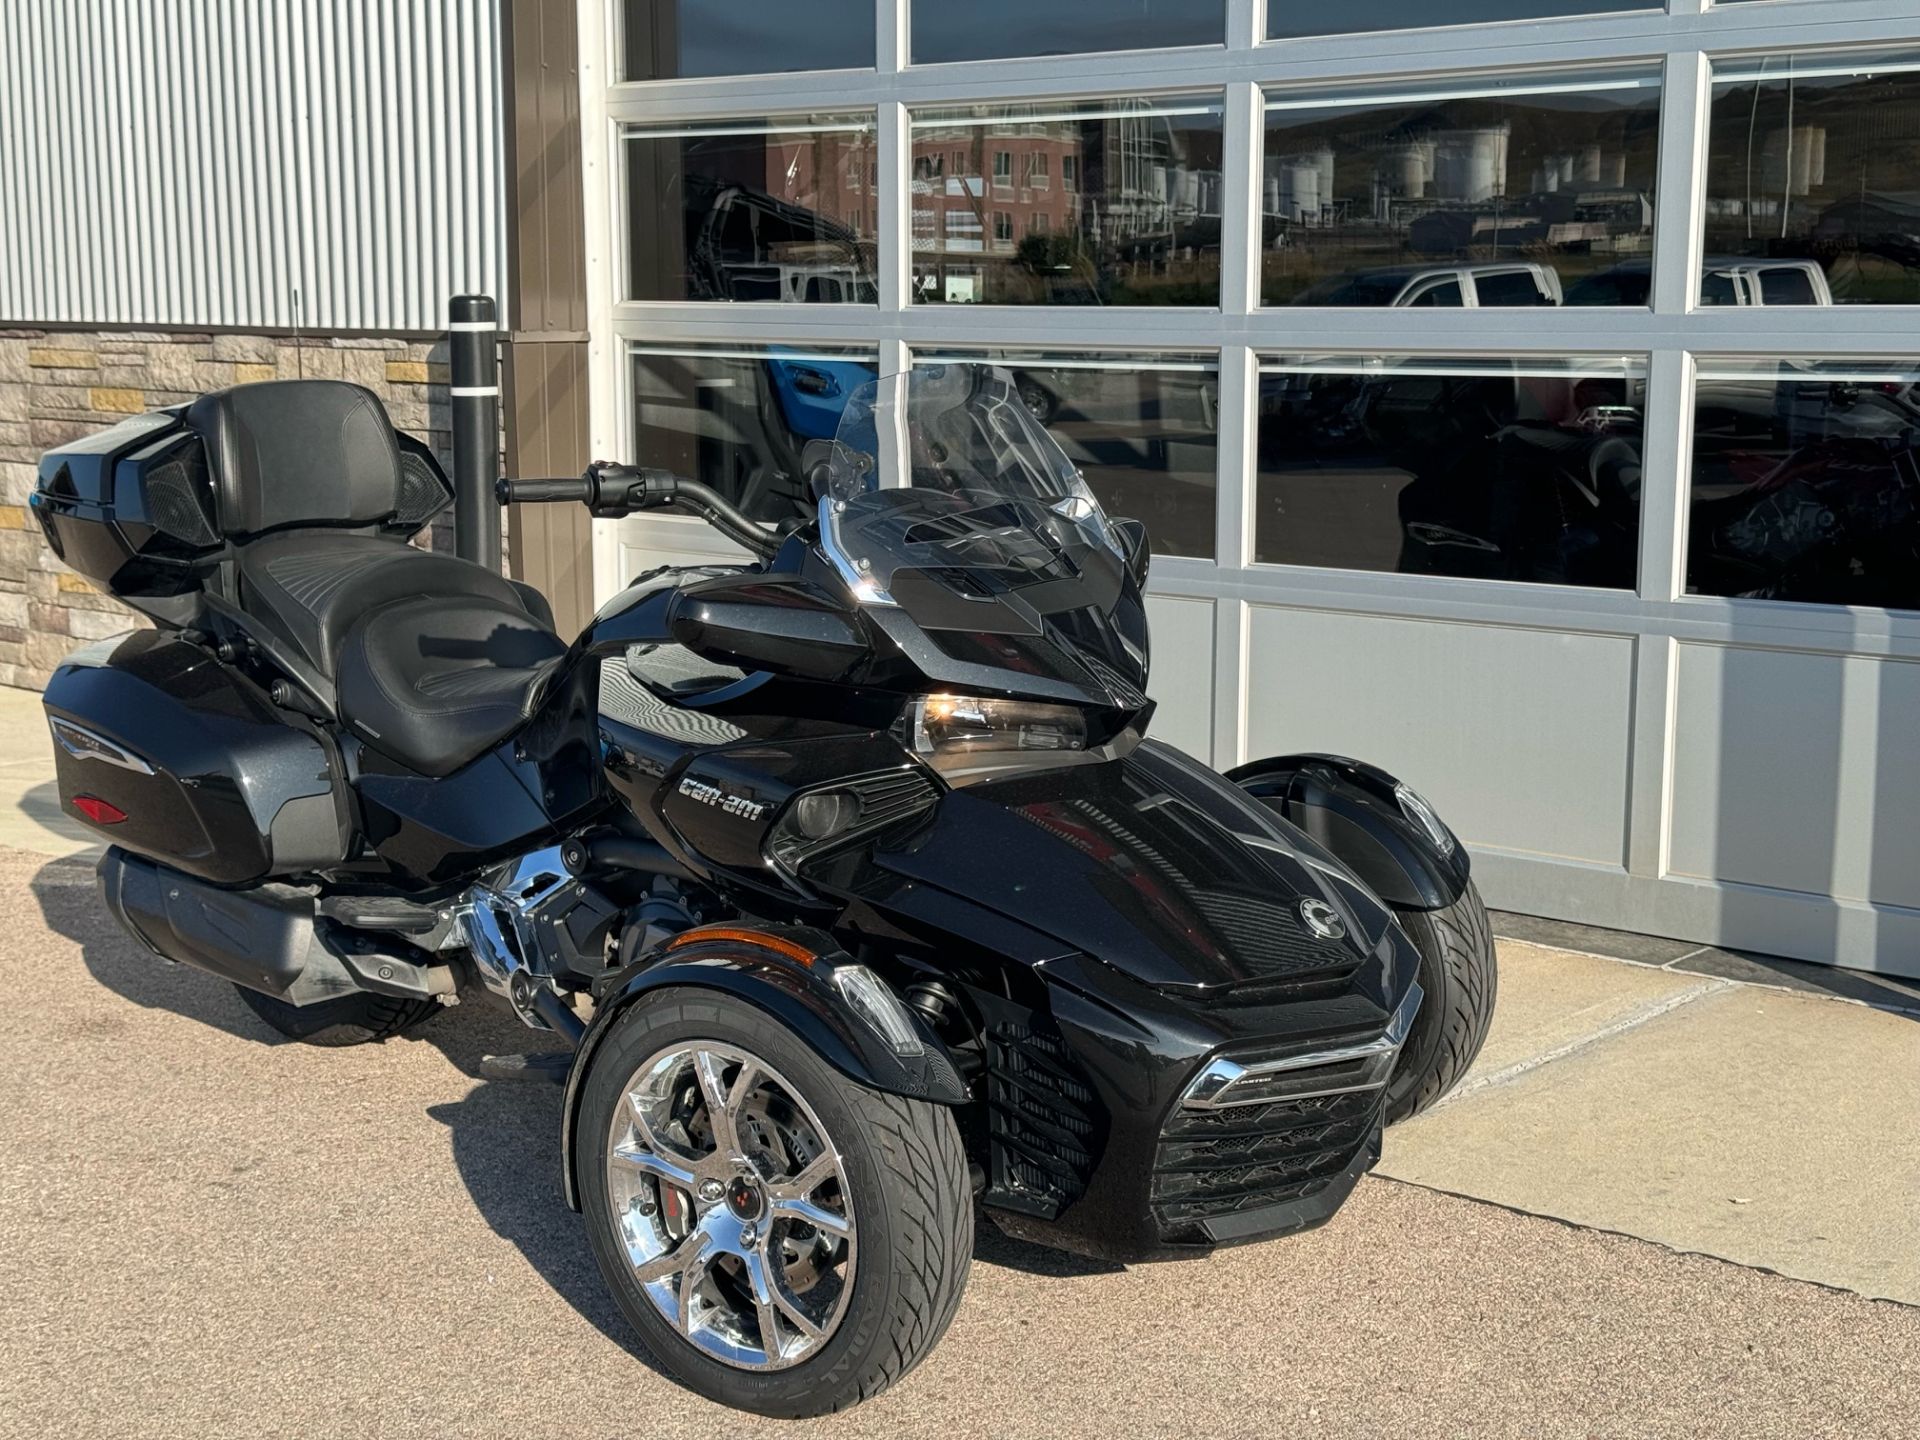 2020 Can-Am Spyder F3 Limited in Rapid City, South Dakota - Photo 5